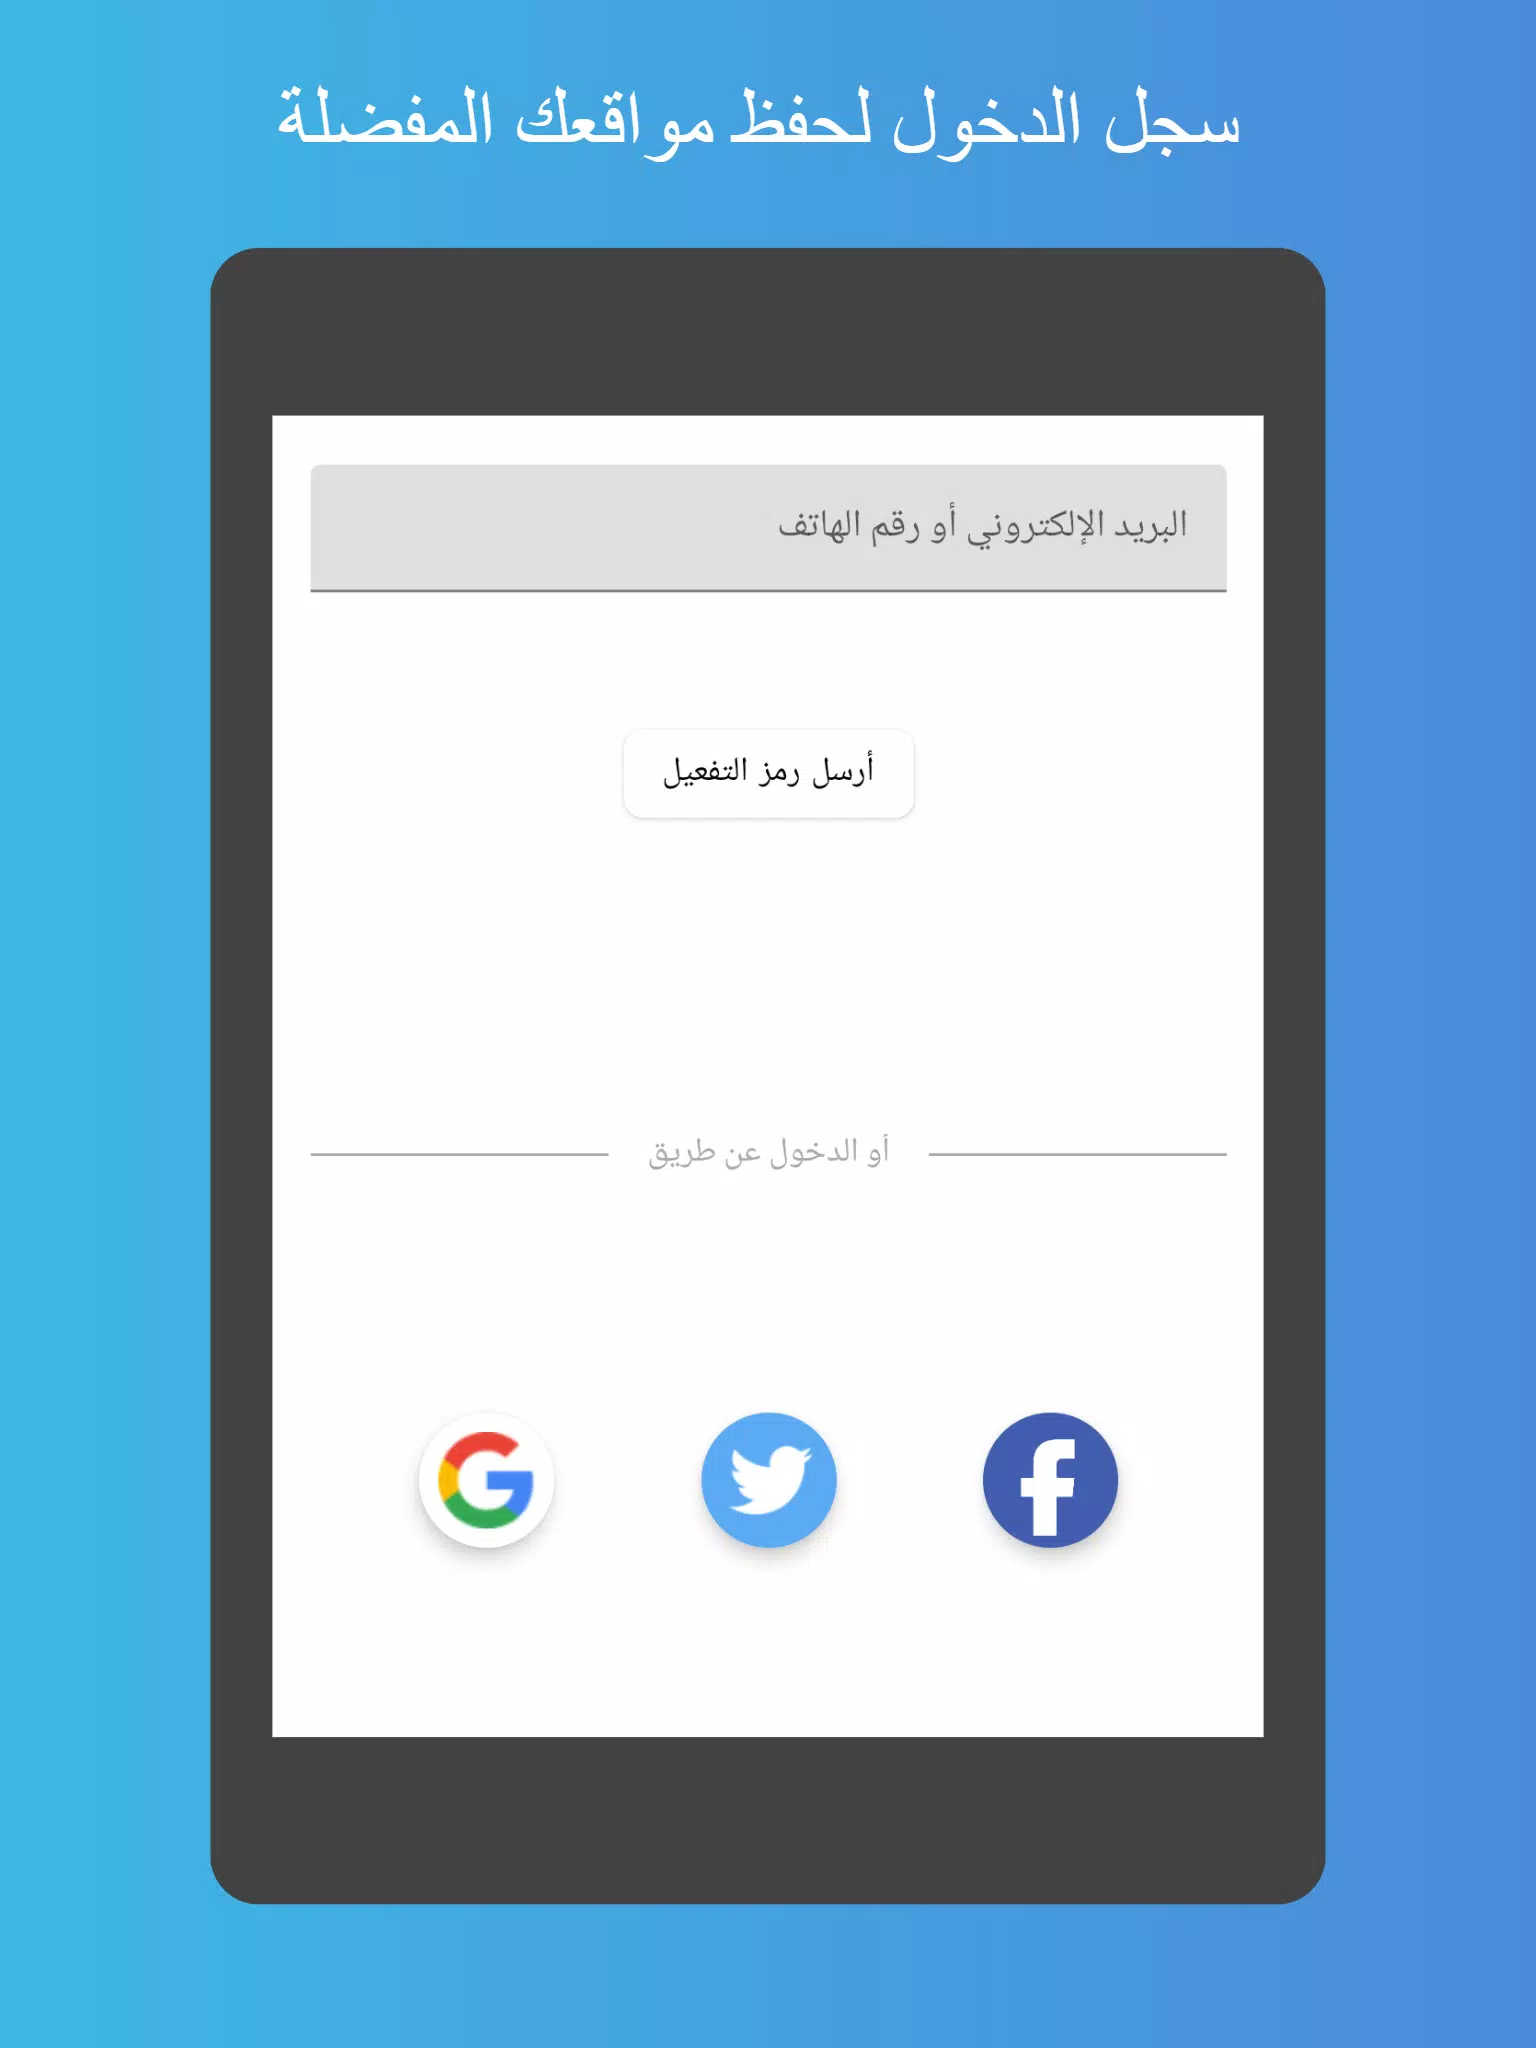 Kuwait Finder for Android - APK Download